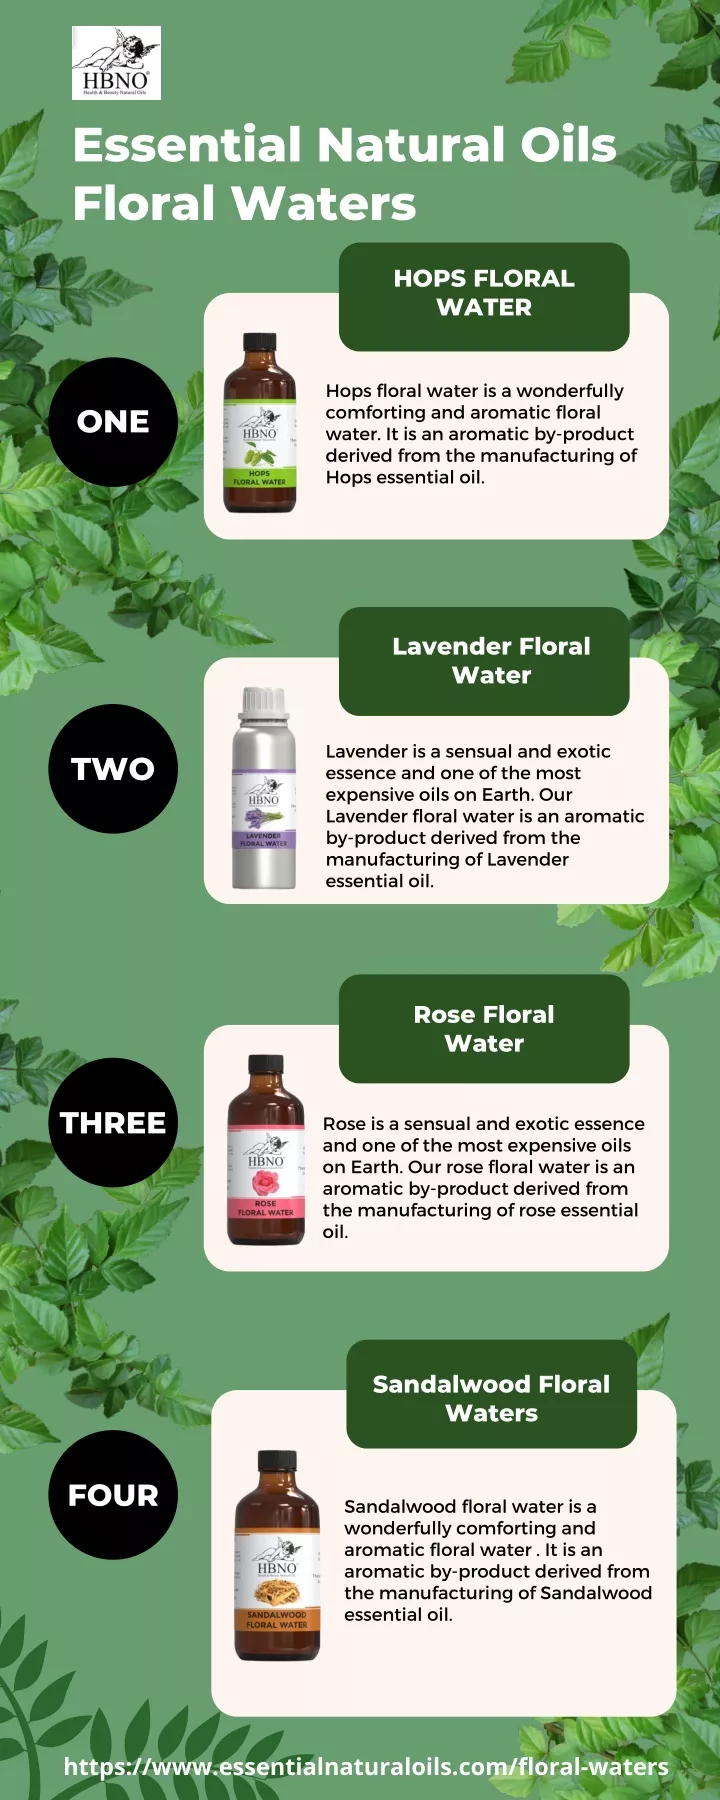 essential natural oils floral waters